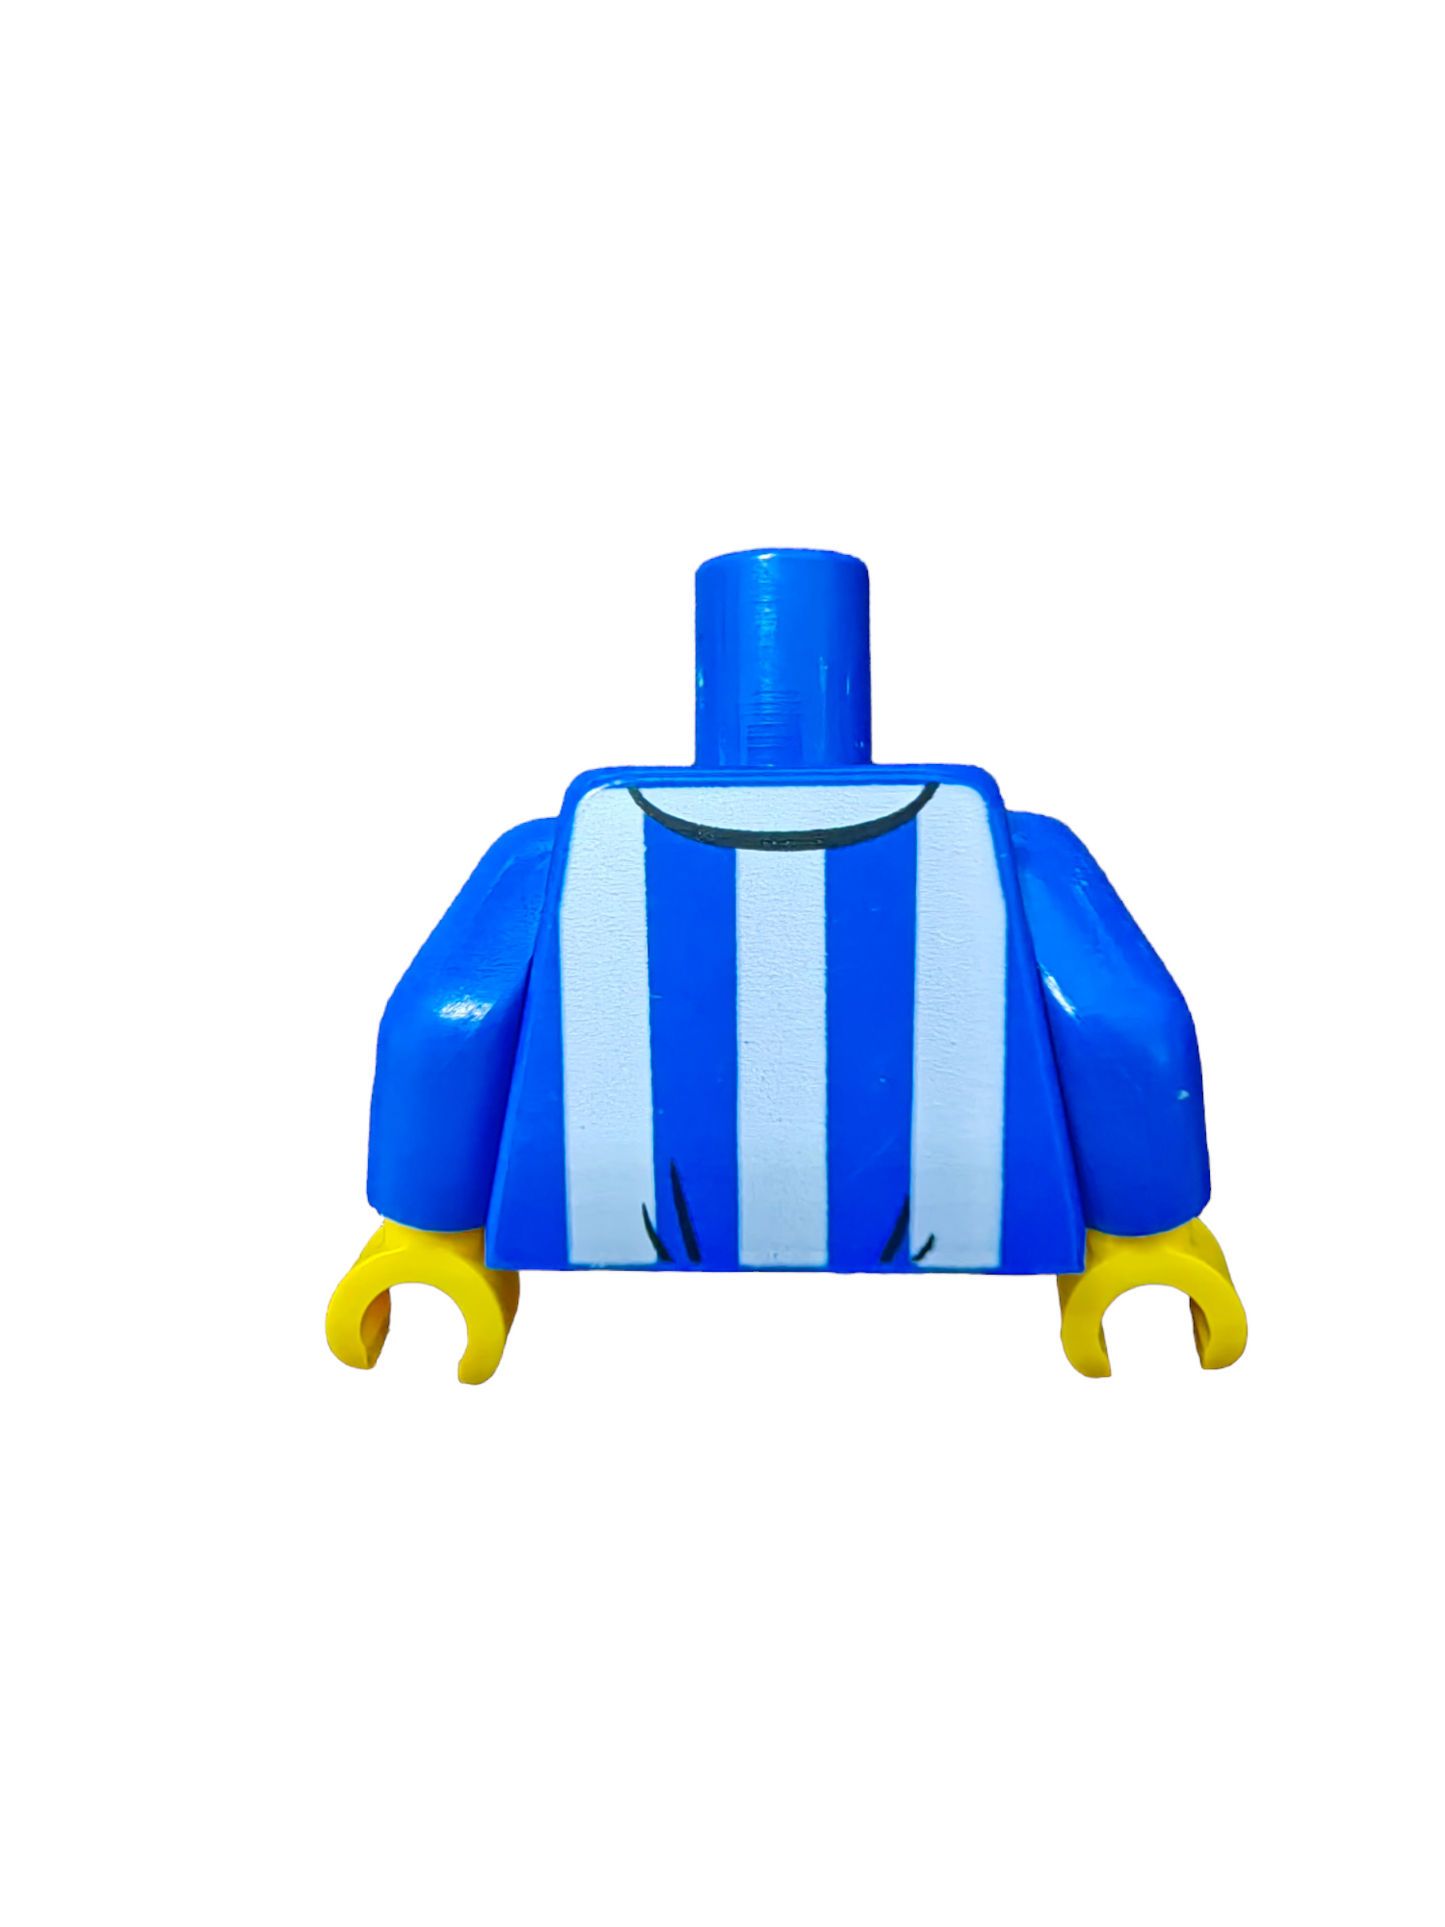 LEGO Torso, Blue Shirt with White Vertical Stripes, with a Red Bow Tie - UB1082